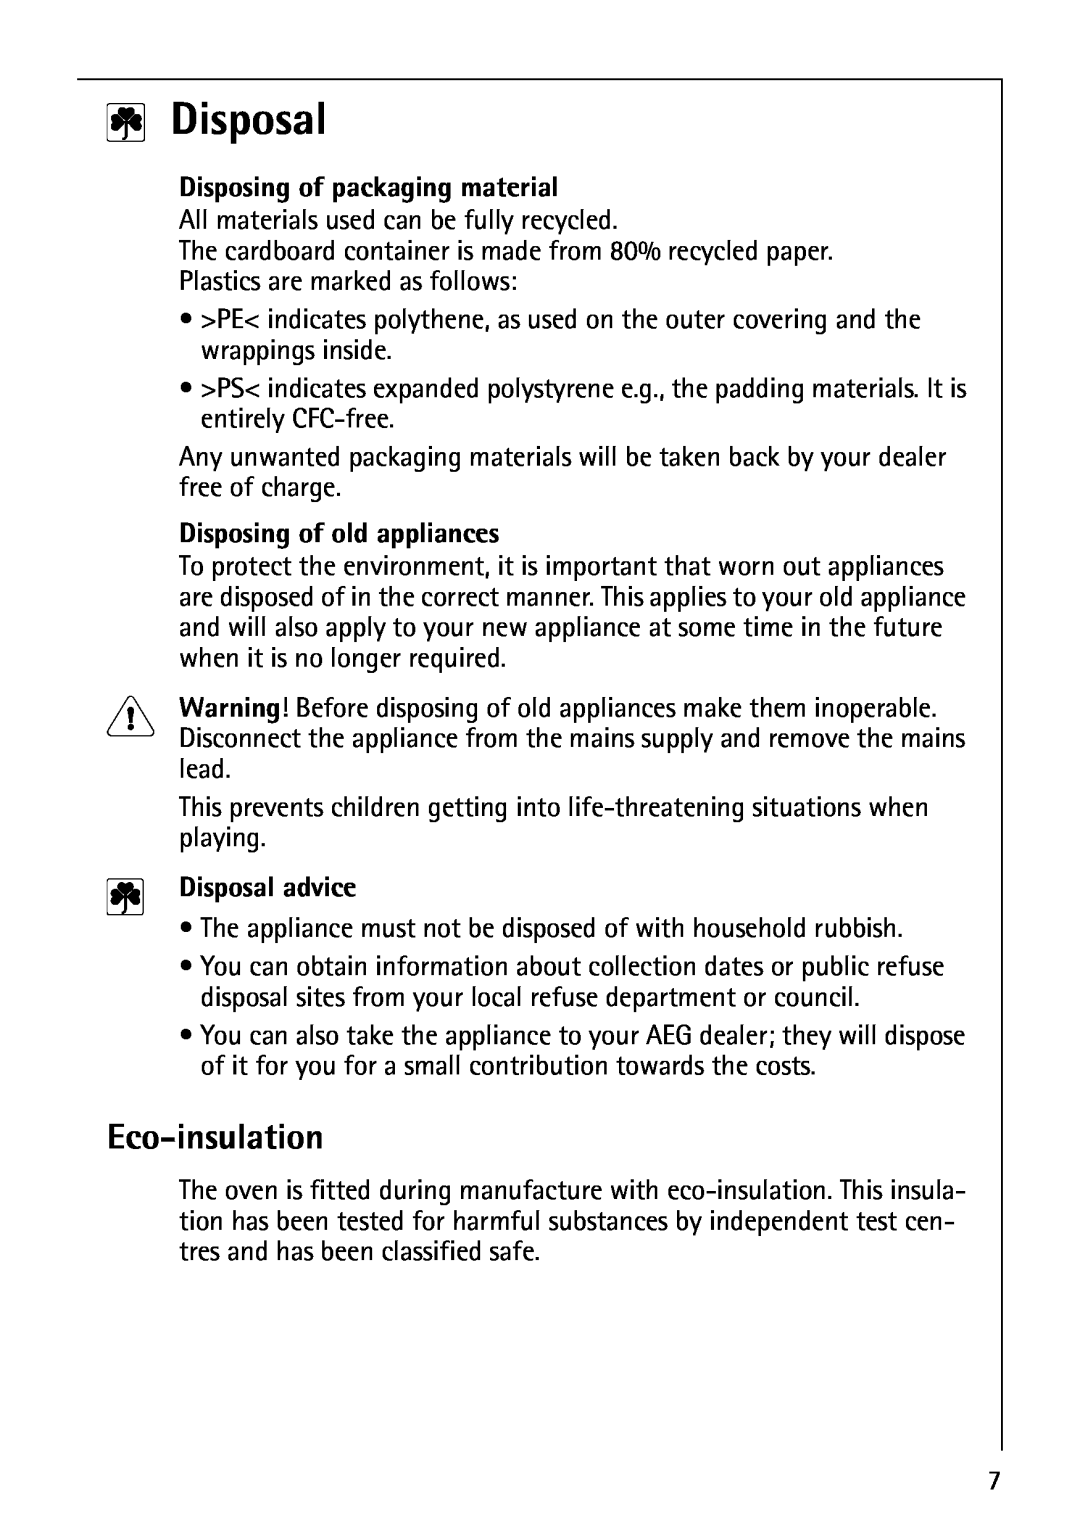 AEG B3040-1 manual 2Disposal, Eco-insulation, Disposing of packaging material, Disposing of old appliances, Disposal advice 